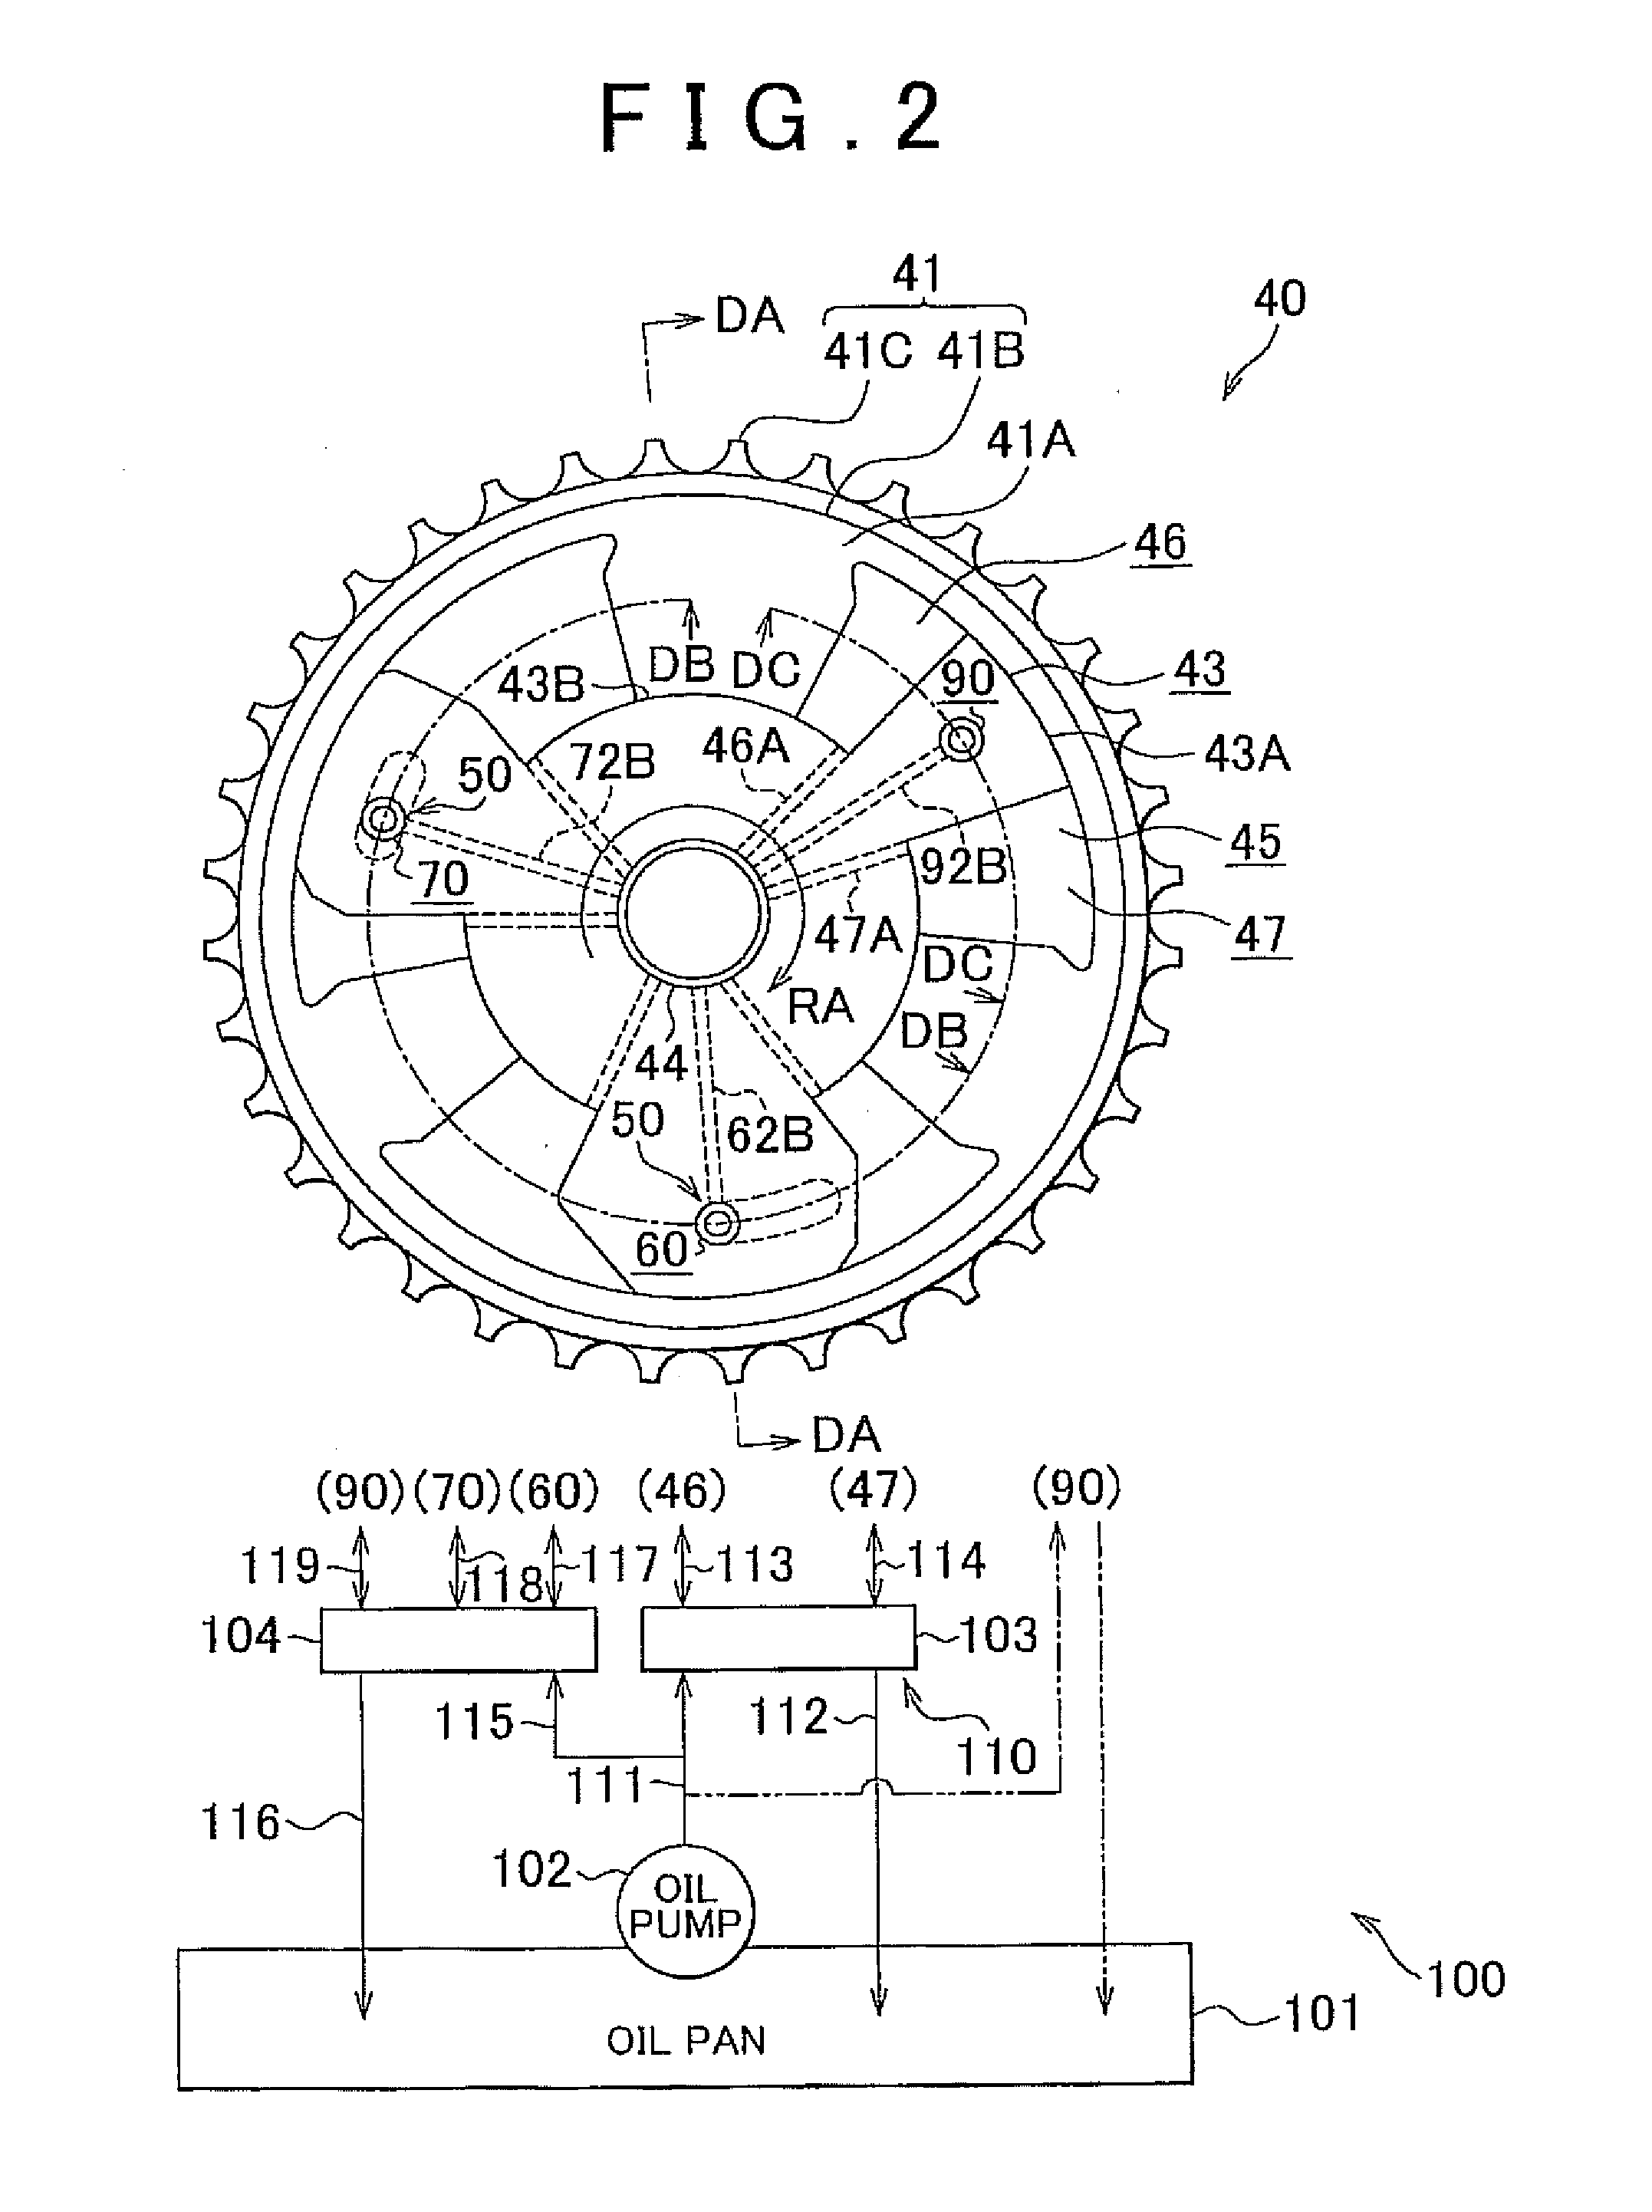 Variable valve timing apparatus for internal combustion engine